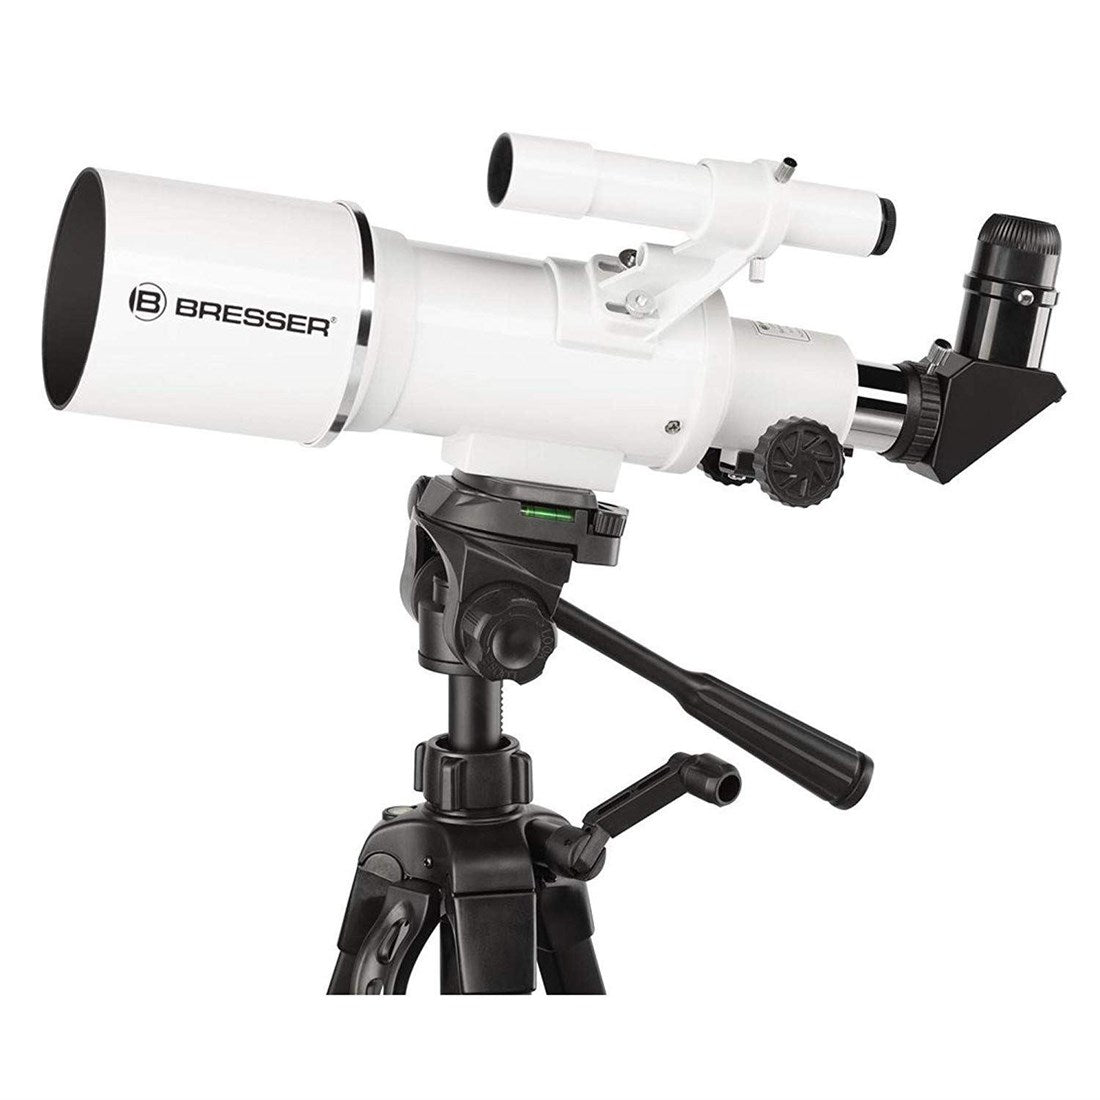 Product Image of Bresser Classic 70/350 Refractor Telescope with Aluminium Mount and Smartphone Holder